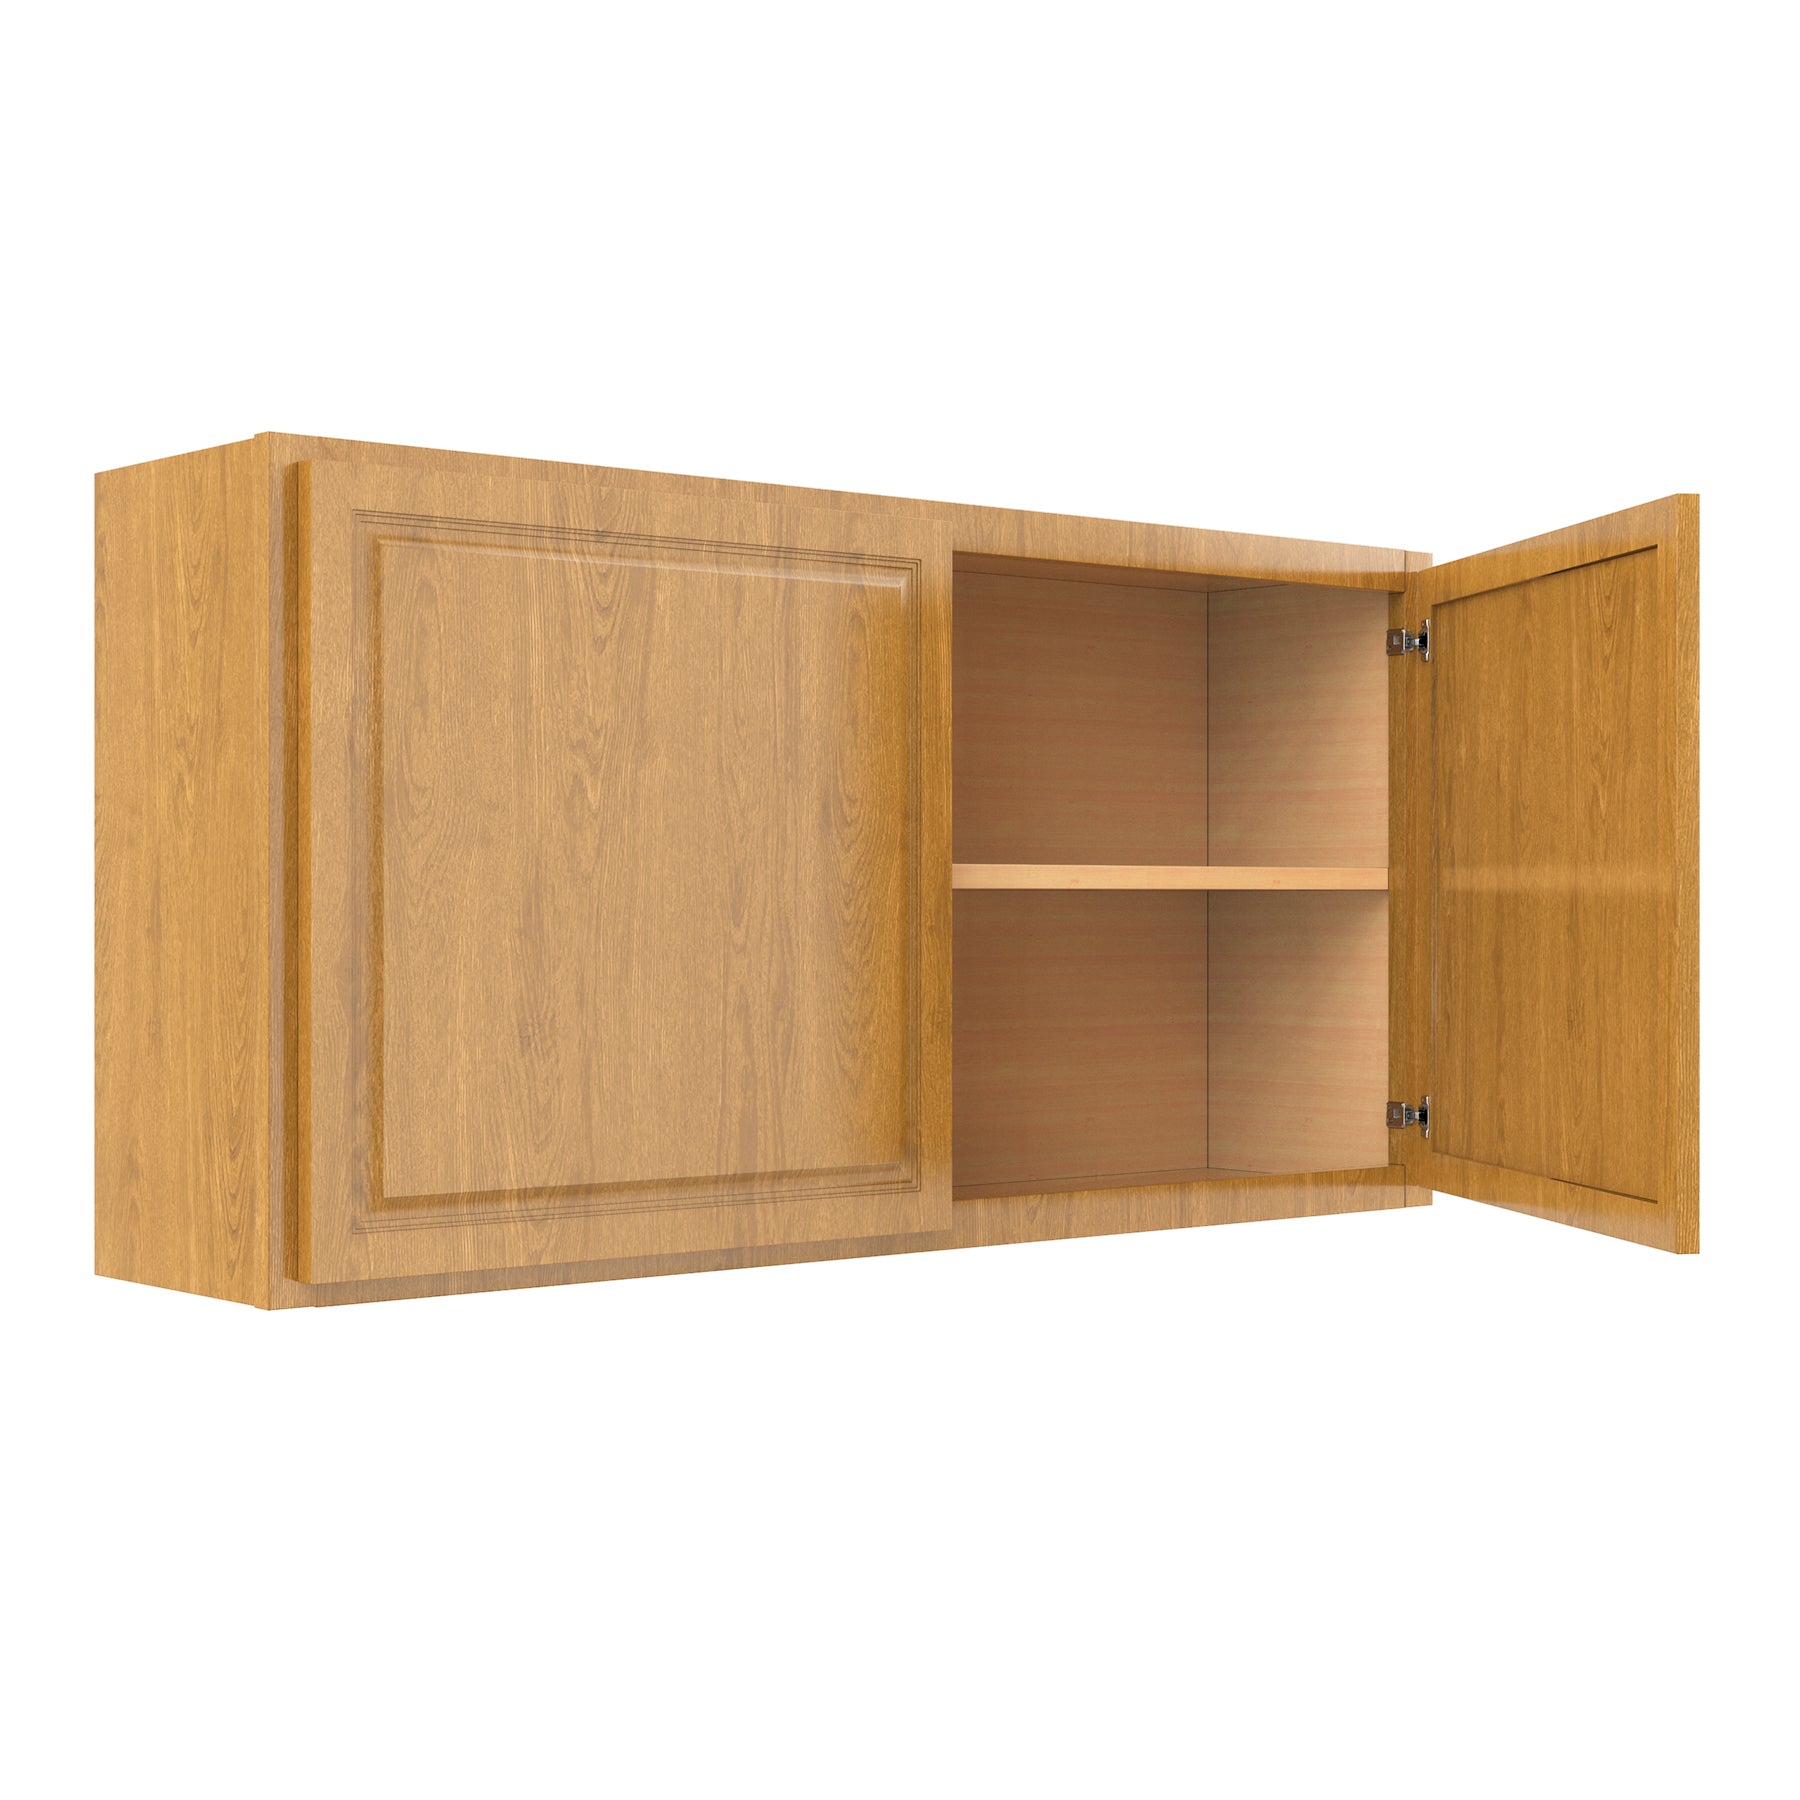 Country Oak 48"W x 24"H Wall Cabinet